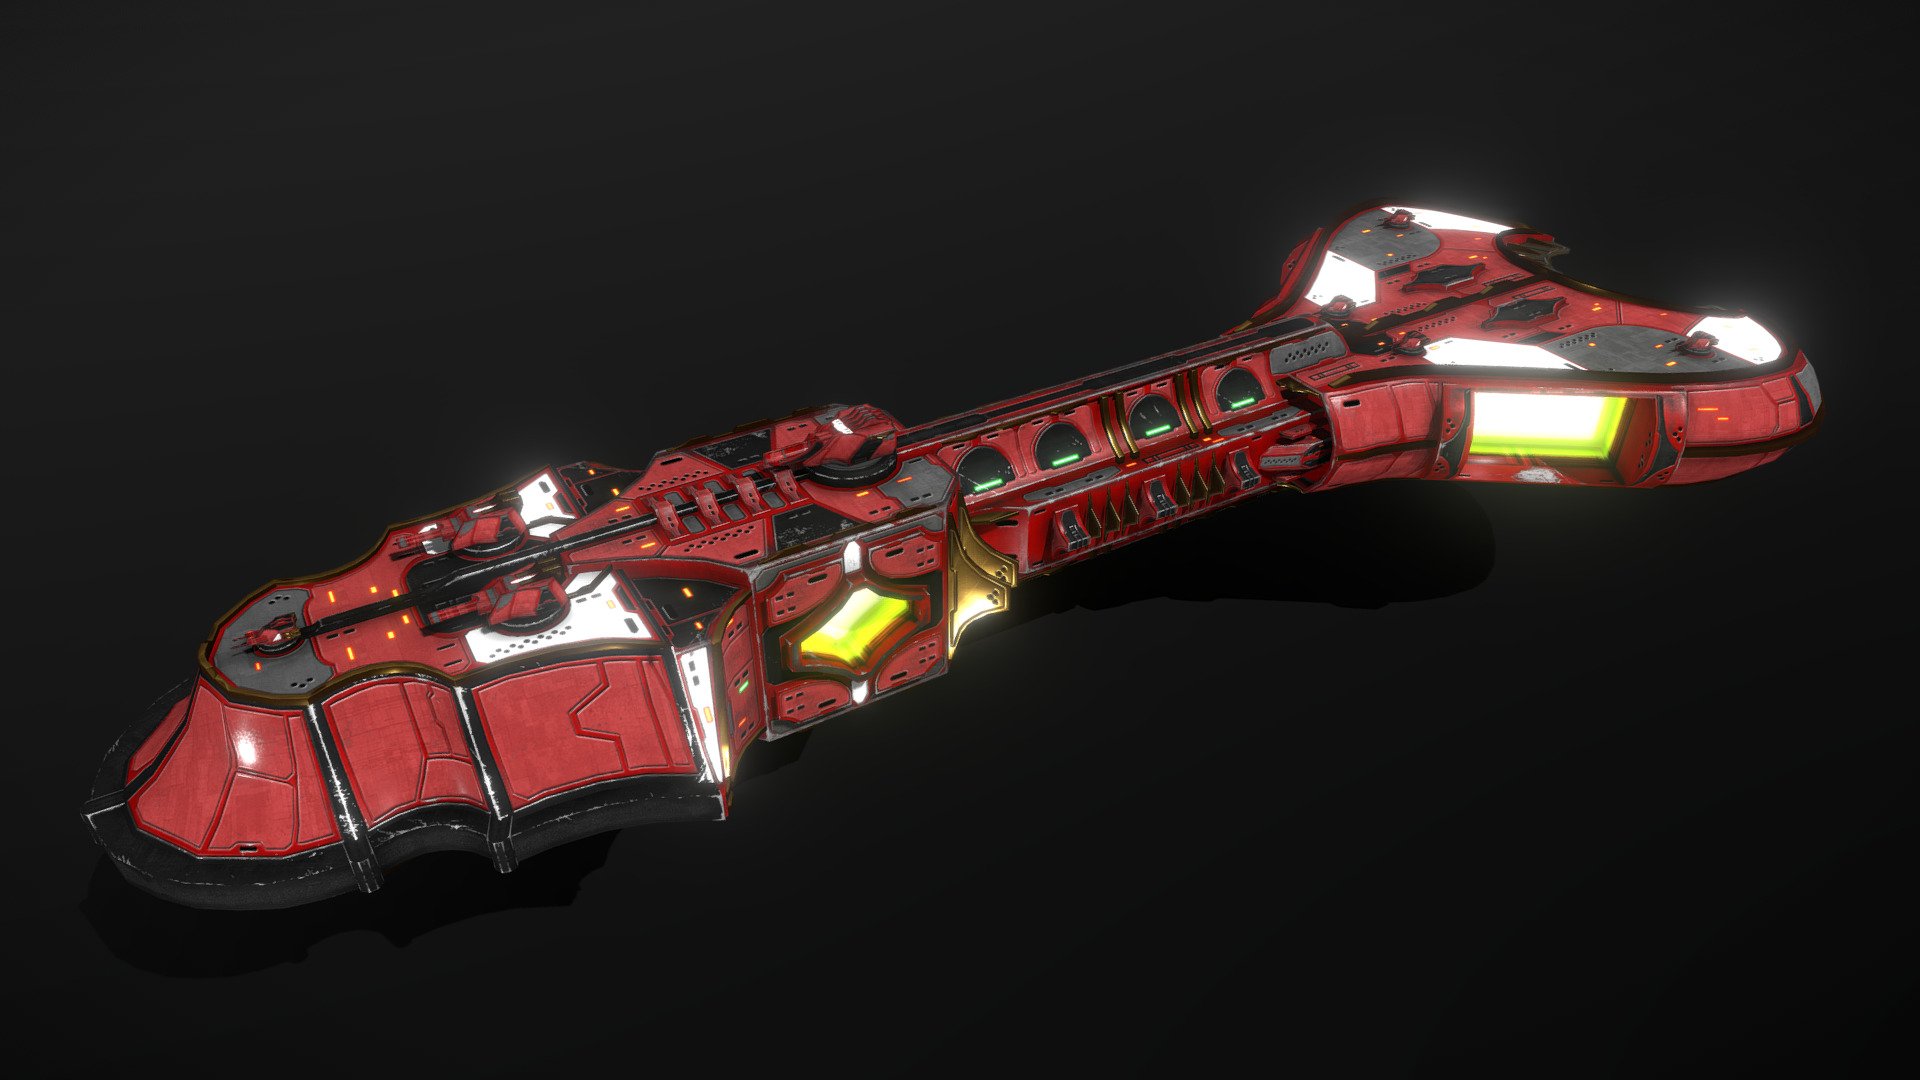 This is a model of a low-poly and game-ready scifi spaceship / space structure model. 

The weapons are separate meshes and can be animated with a keyframe animation tool. The weapon loadout can be changed too. 

The model comes with several differently colored texture sets. The PSD file with intact layers is included.

If you have purchased this model please make sure to download the “additional file”.  It contains FBX and OBJ meshes, full resolution textures and the source PSDs with intact layers. The meshes are separate and can be animated (e.g. firing animations for gun barrels, rotating turrets, etc) 3d model